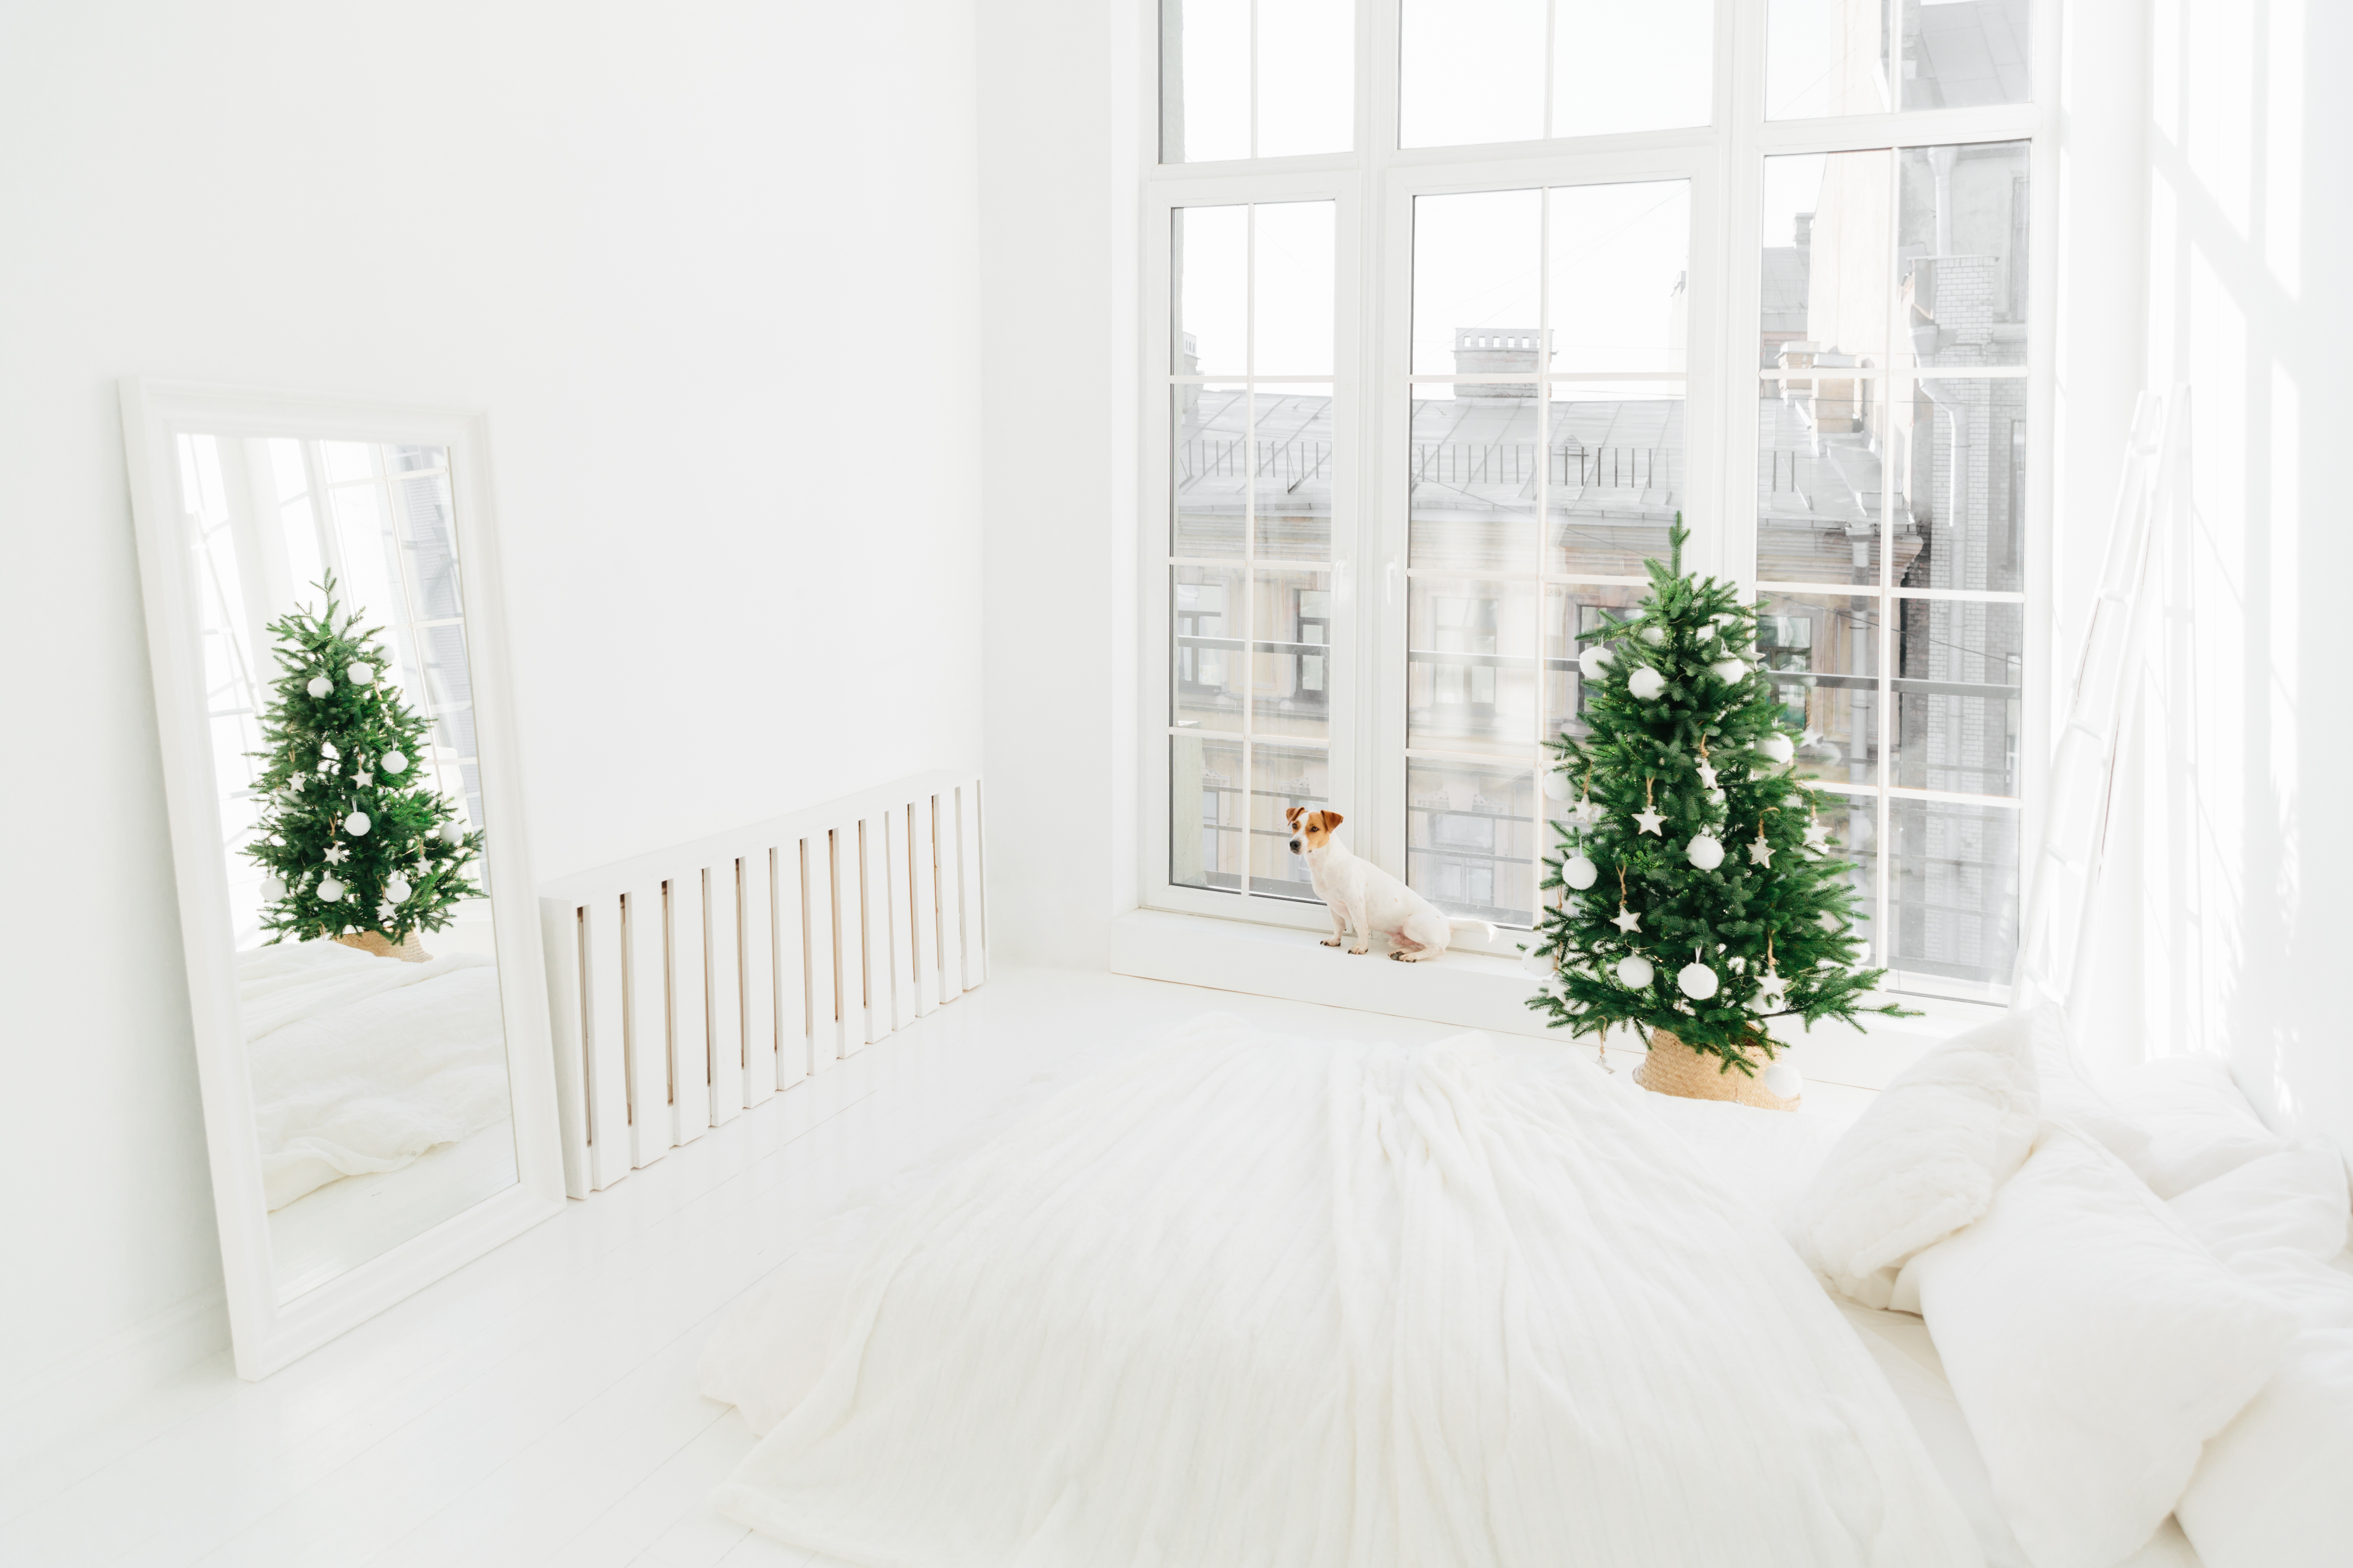 Spacious white bedroom with bed, decorated Christmas tree, mirror and dog on windowsill